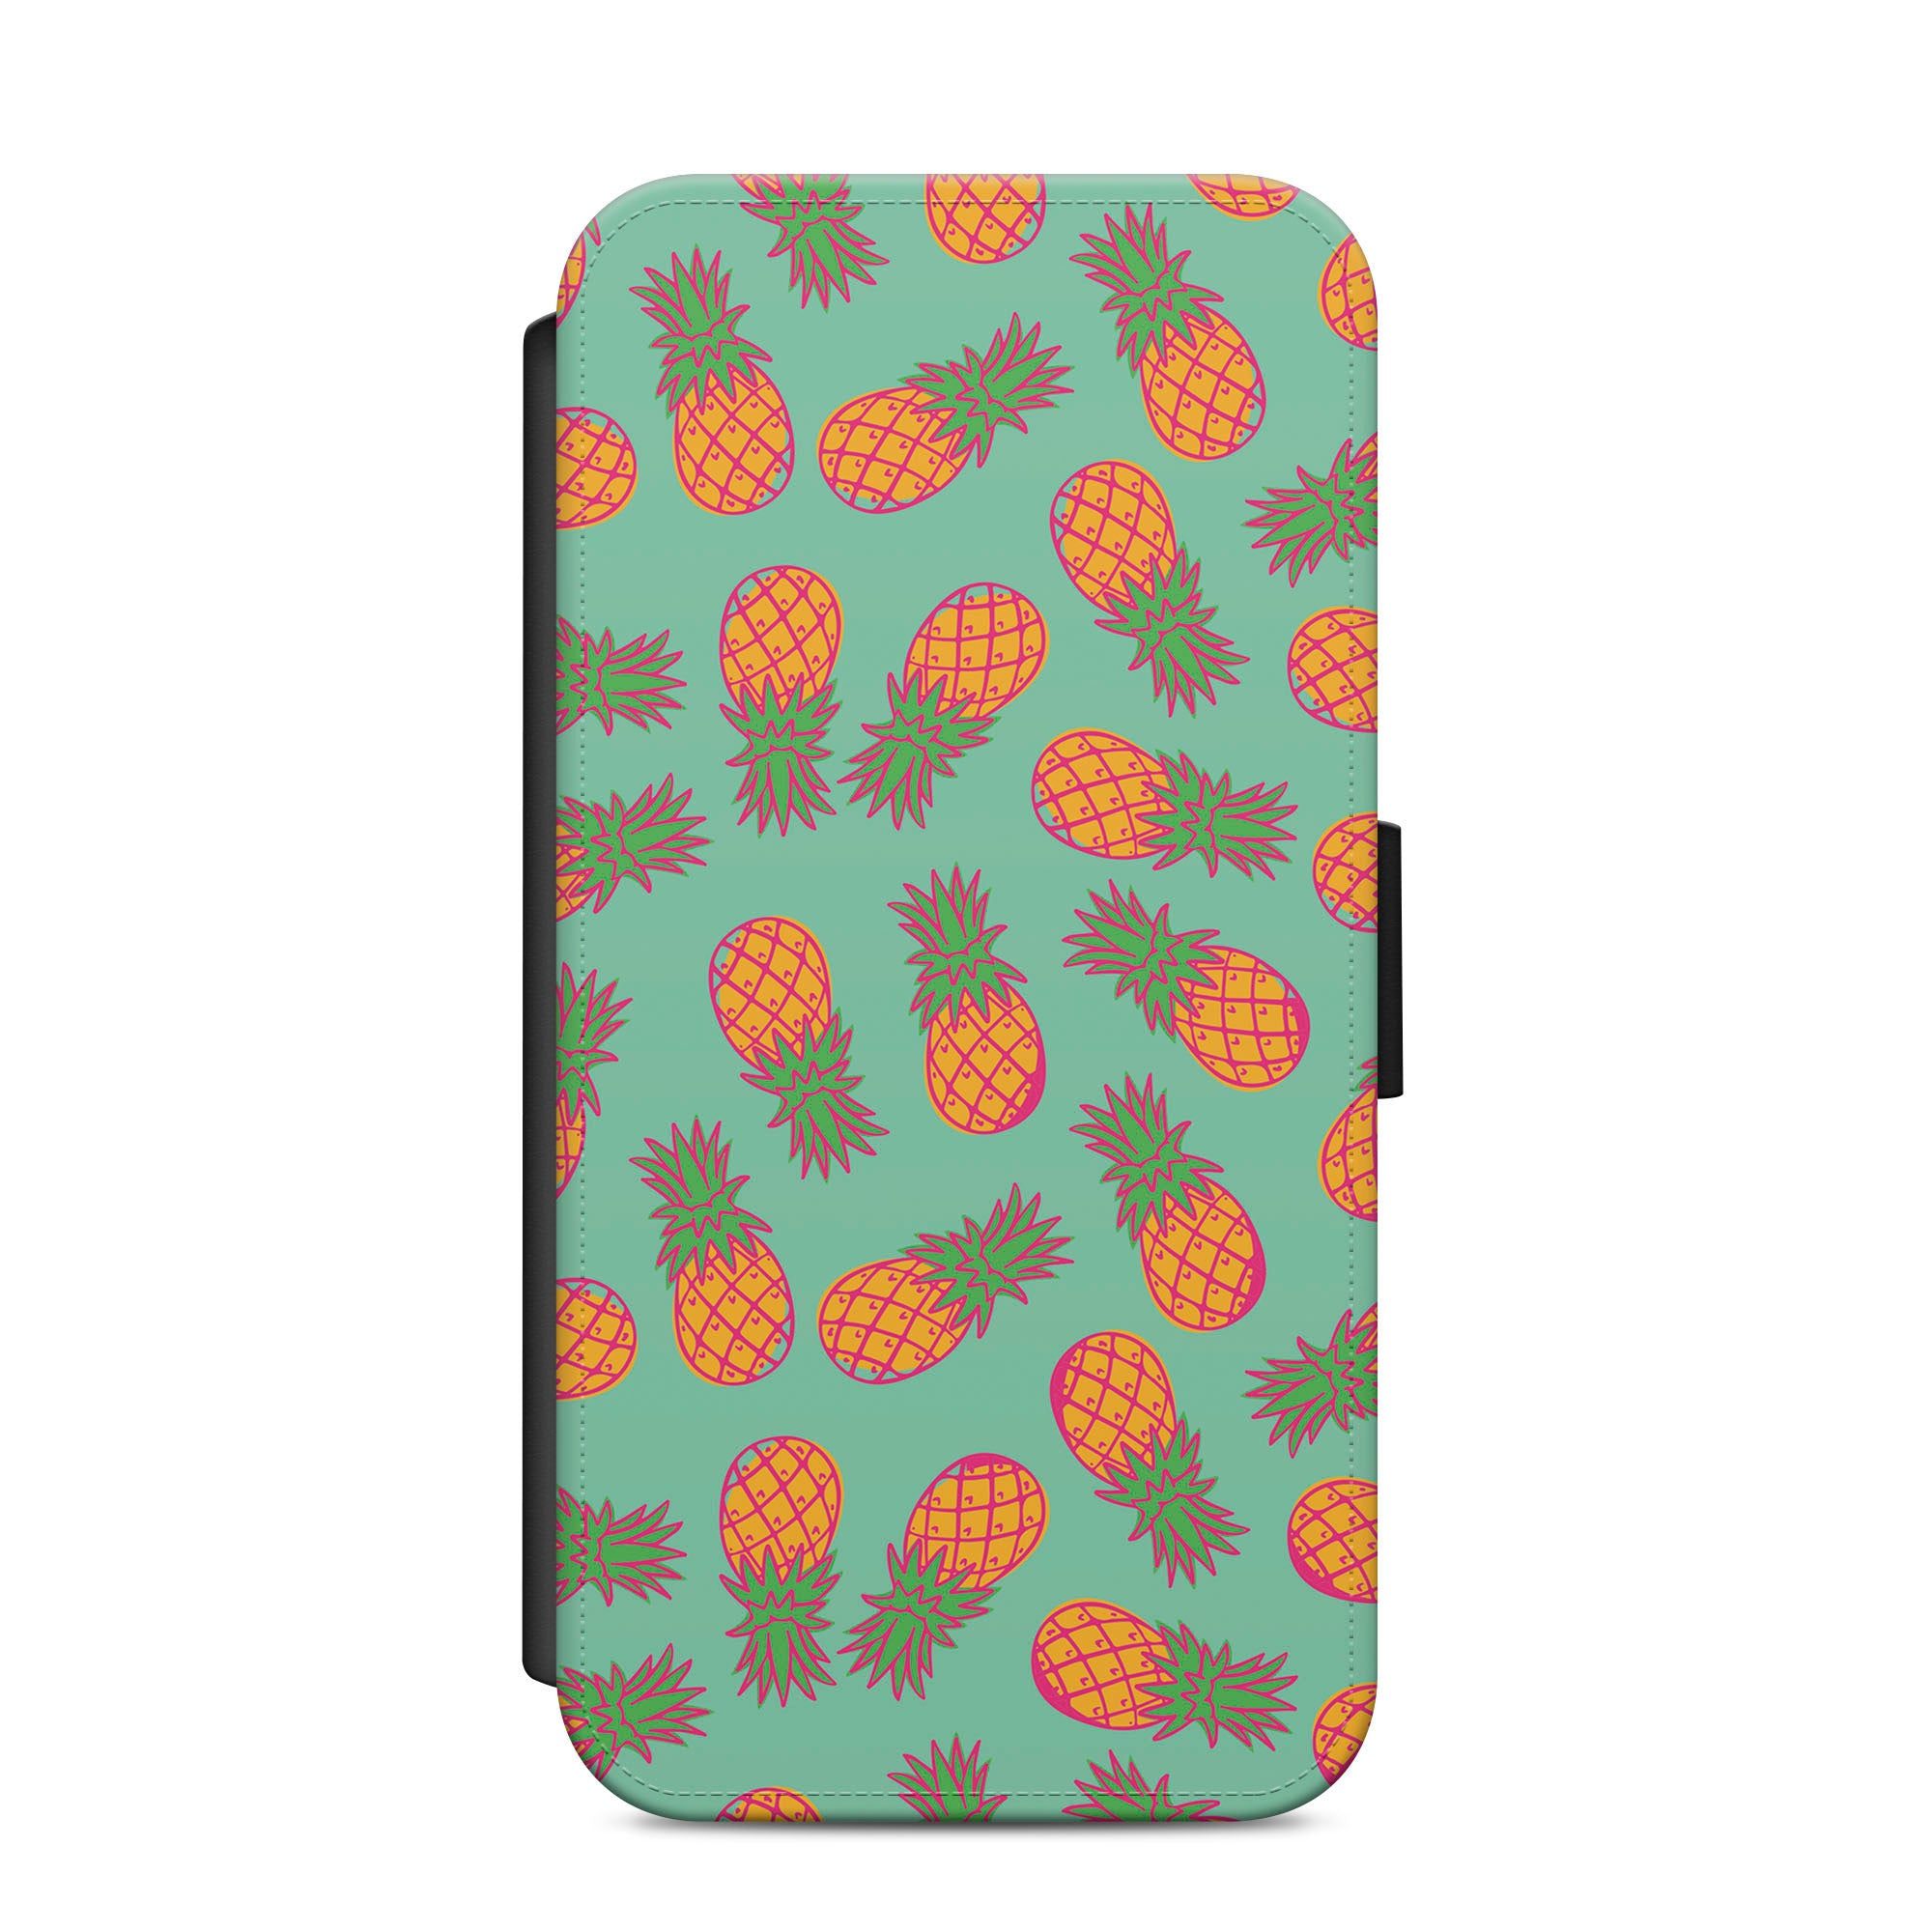 Green Pineapple Faux Leather Flip Case Wallet for iPhone / Samsung